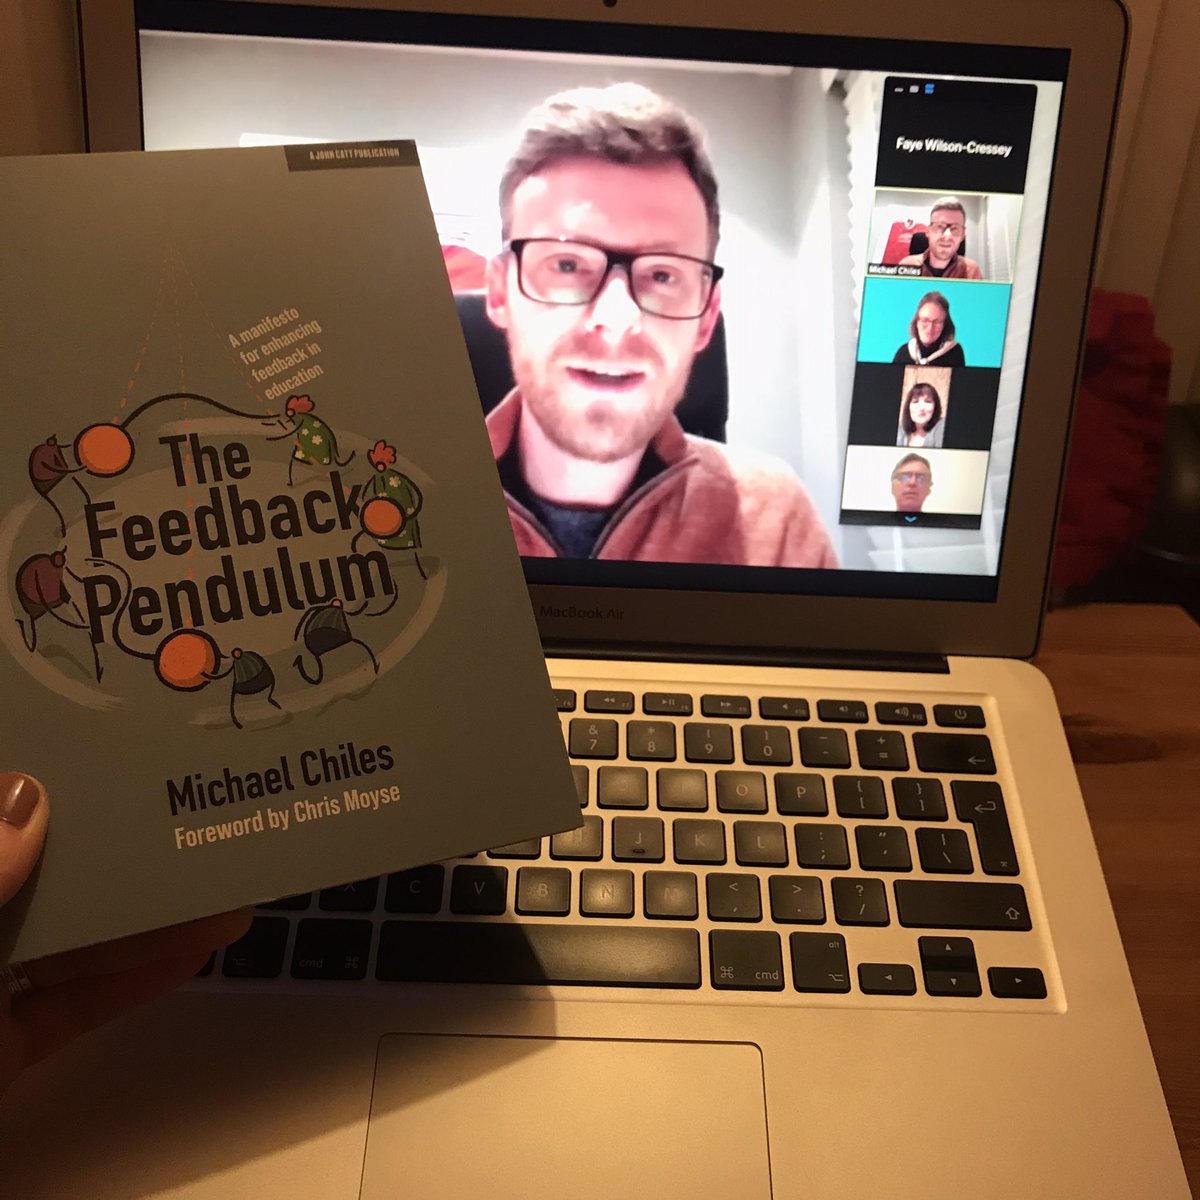 @m_chiles my copy arrived during the webinar!! Really looking forward to reading and hopefully getting some inspiration for my LPA research. #geographyteacher #leadpractitioner